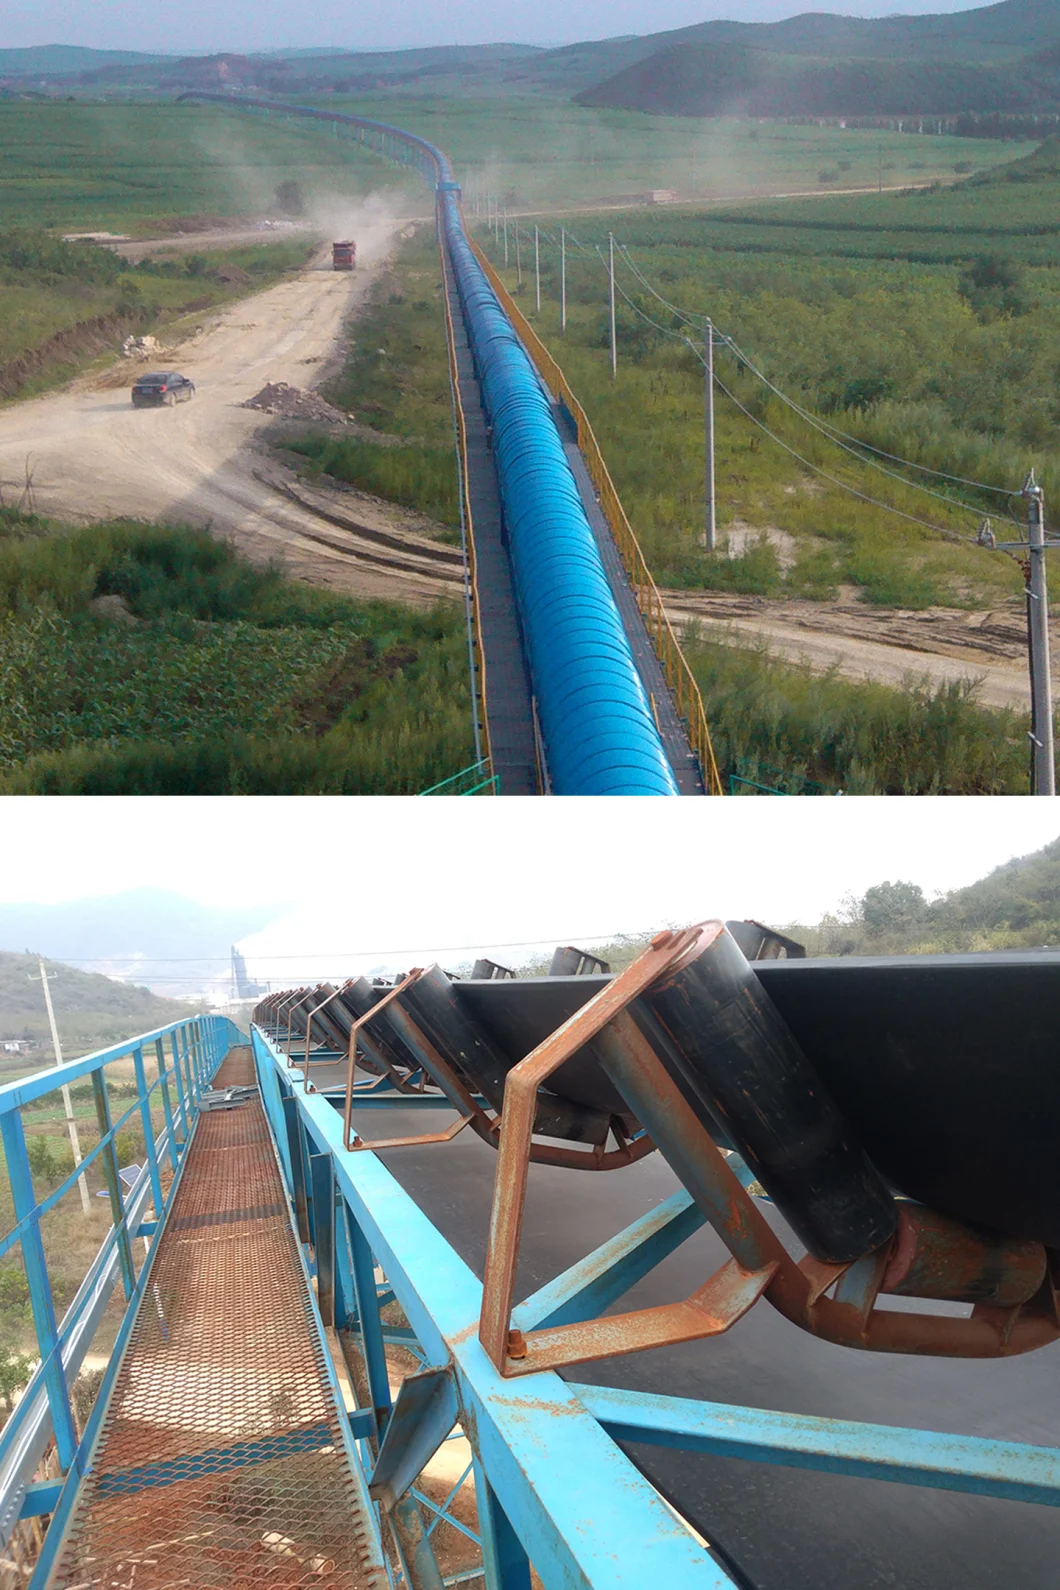 Customized Pipe Conveyor/ Material Handling Equipment for Coal Handling System